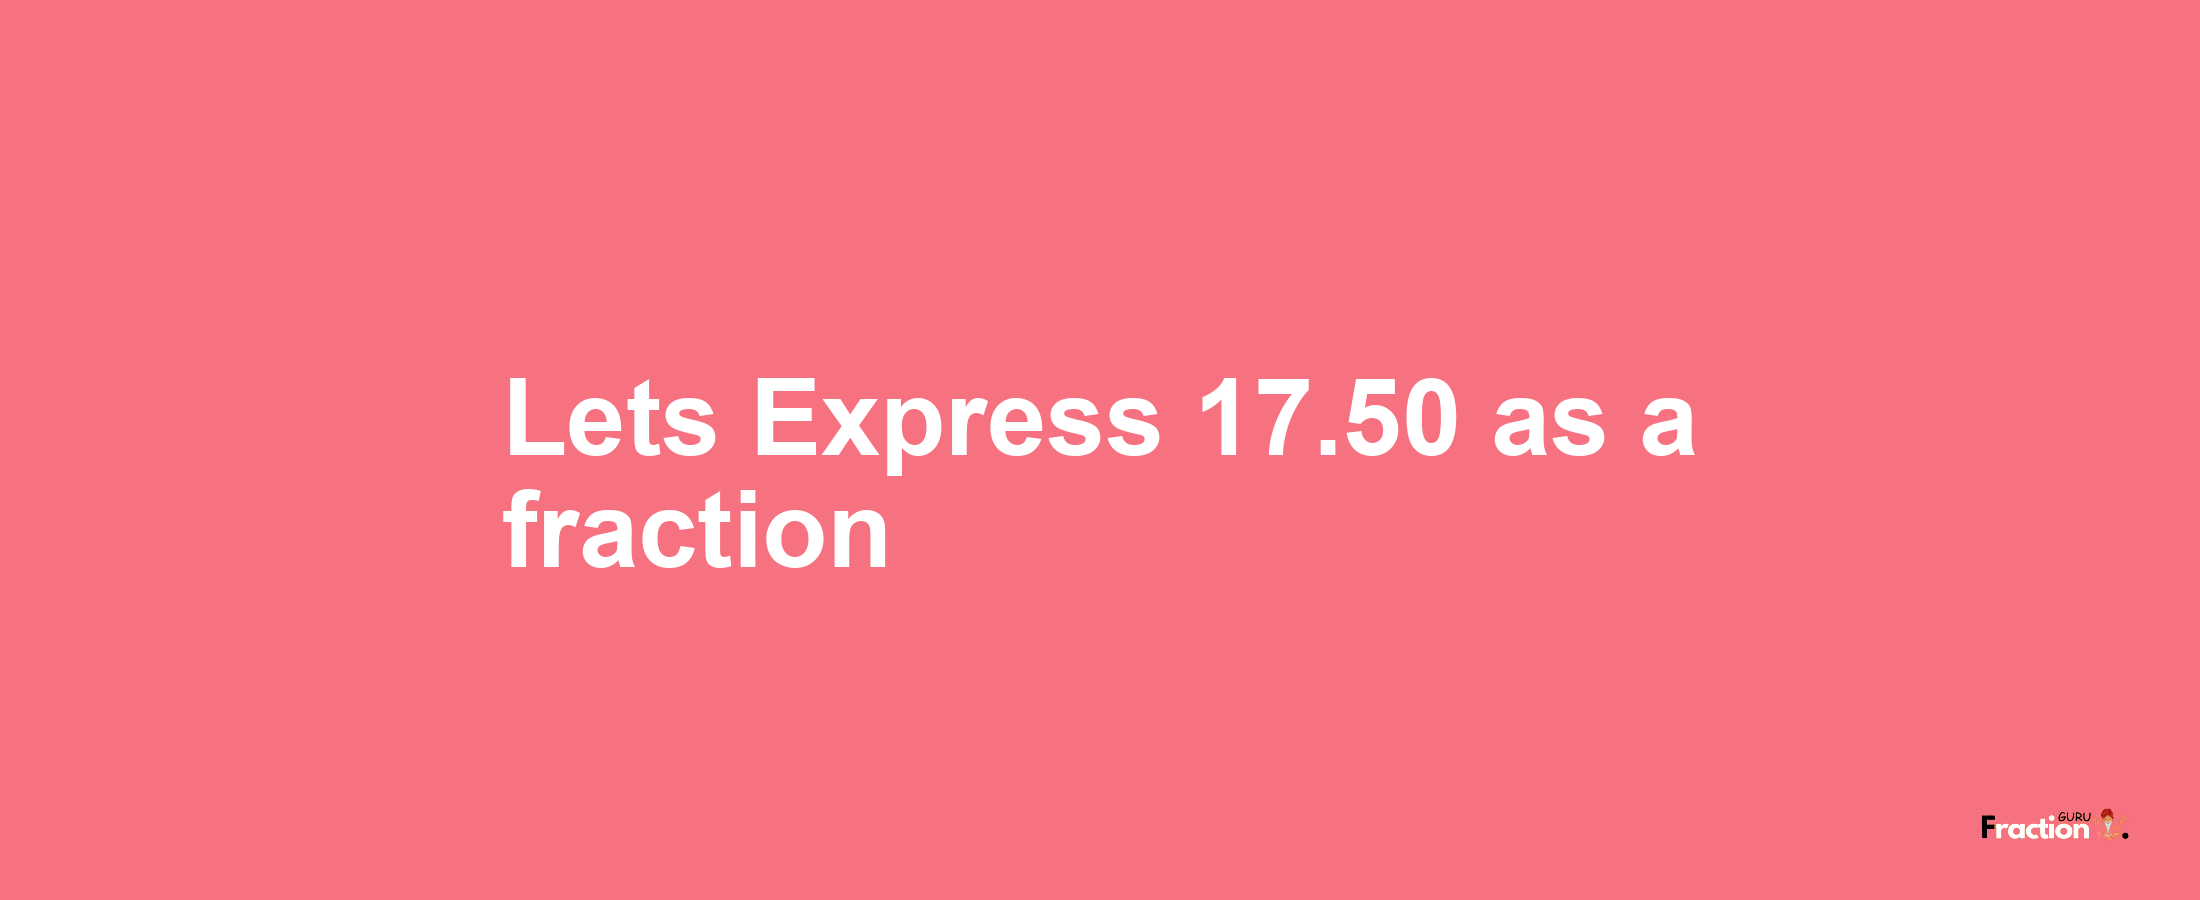 Lets Express 17.50 as afraction